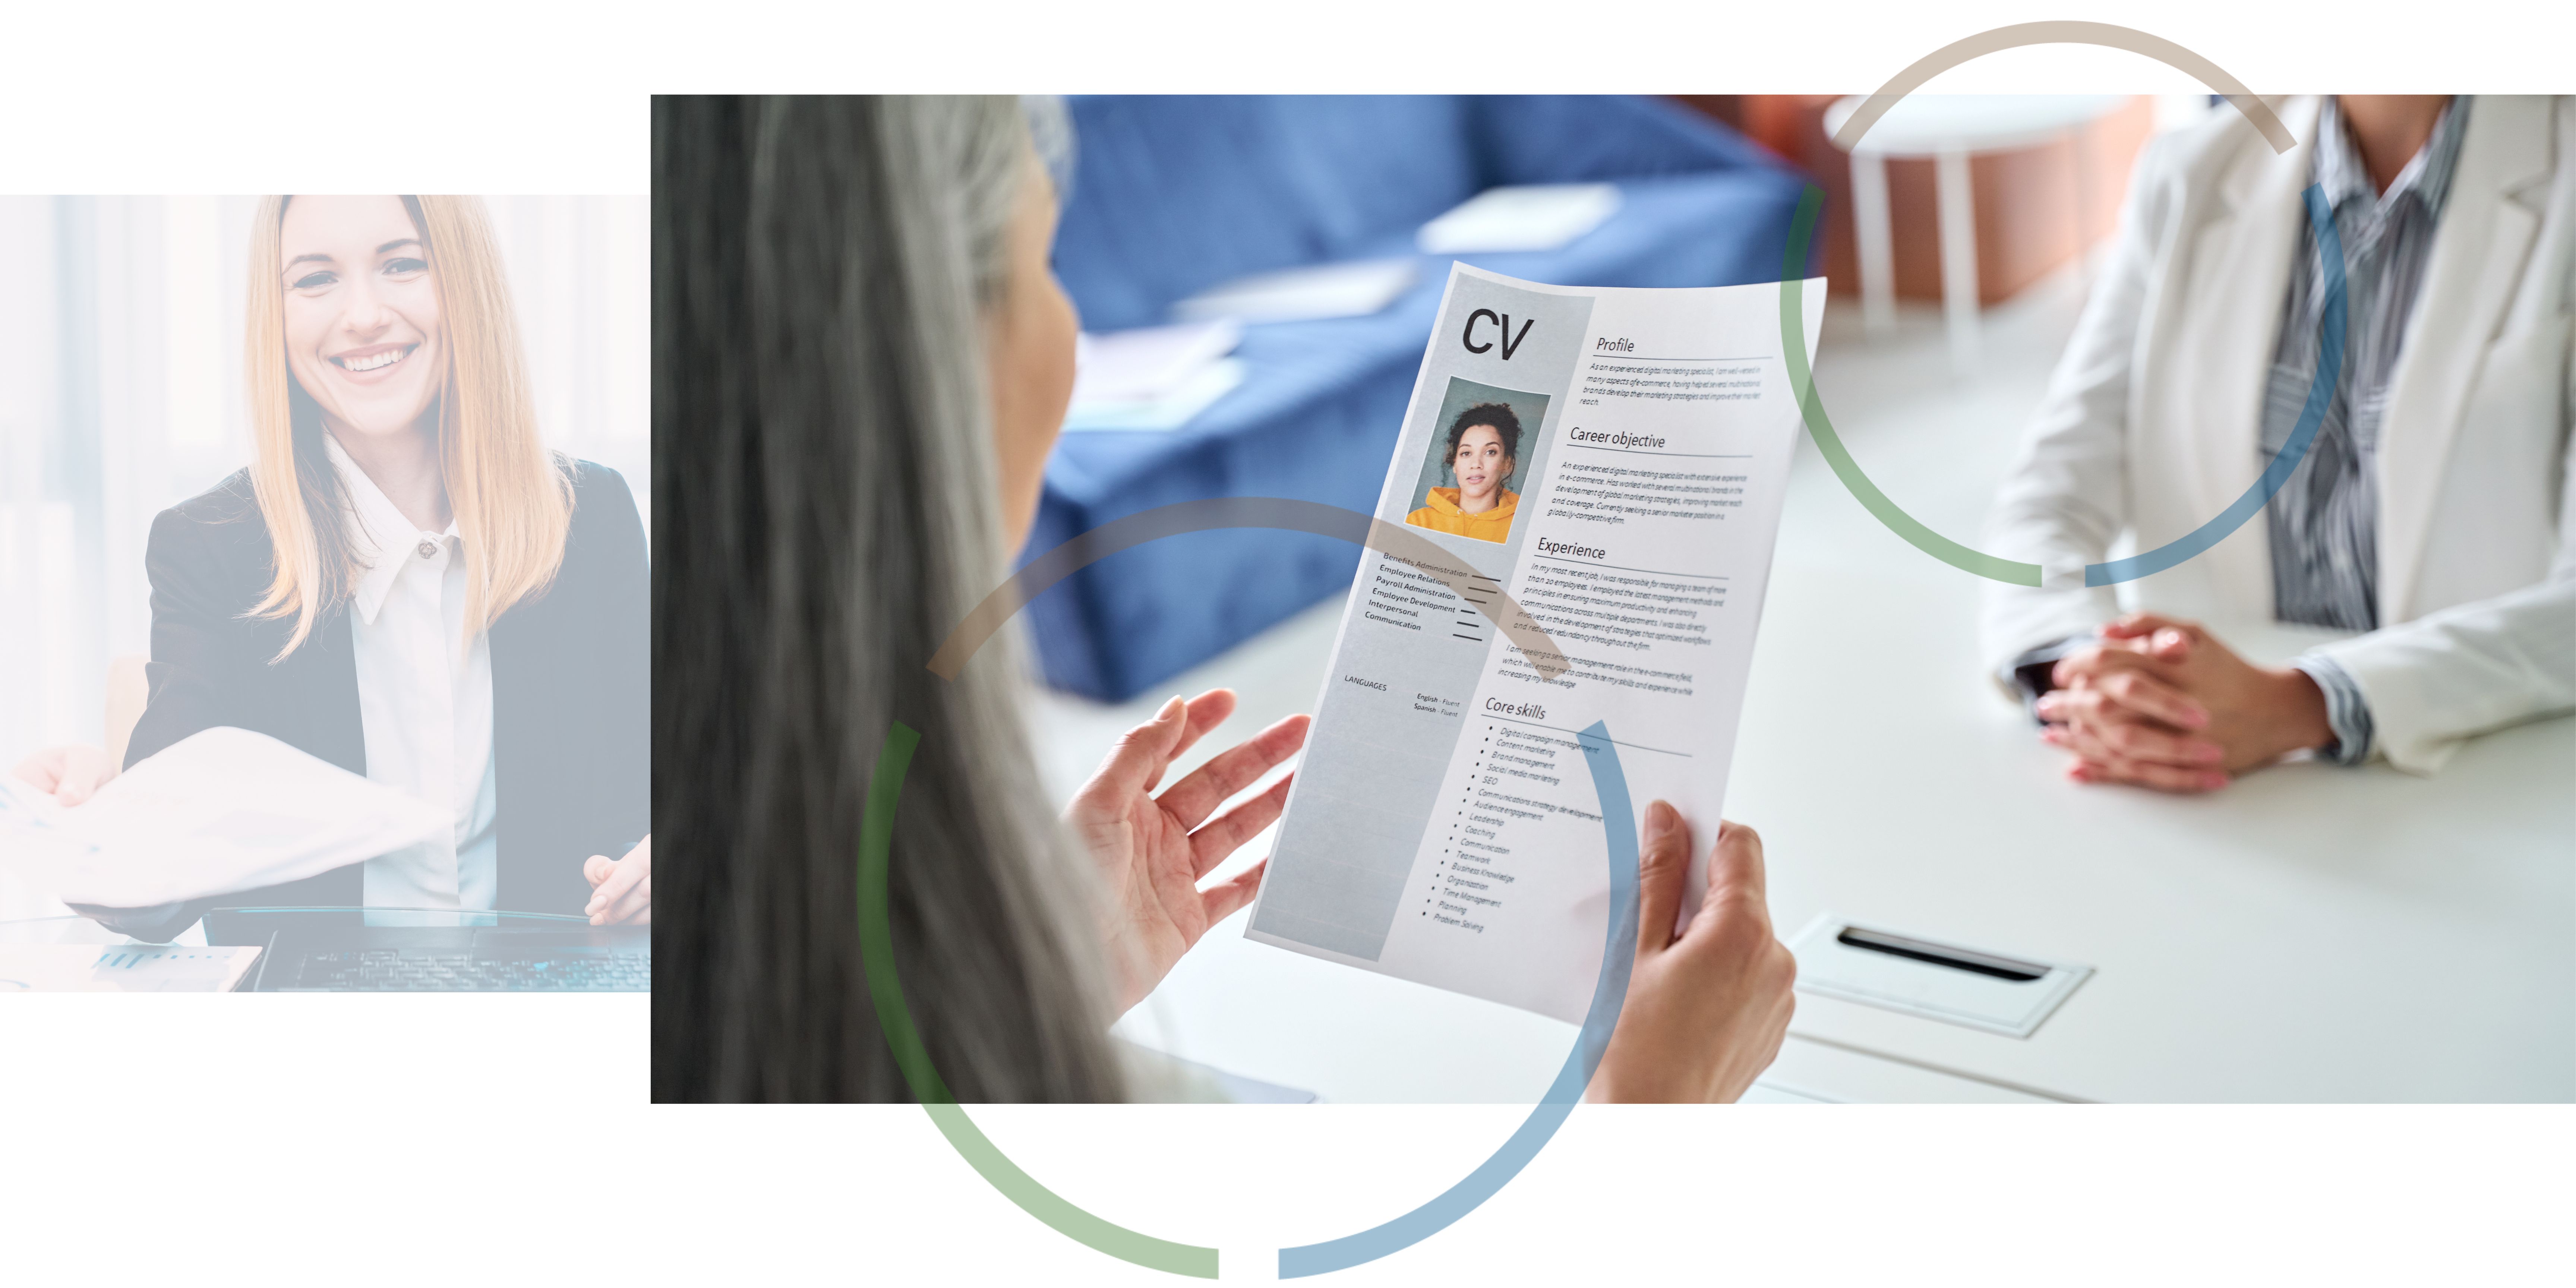 An image of a woman smiling at a desk and an image of a woman looking at a printed CV.